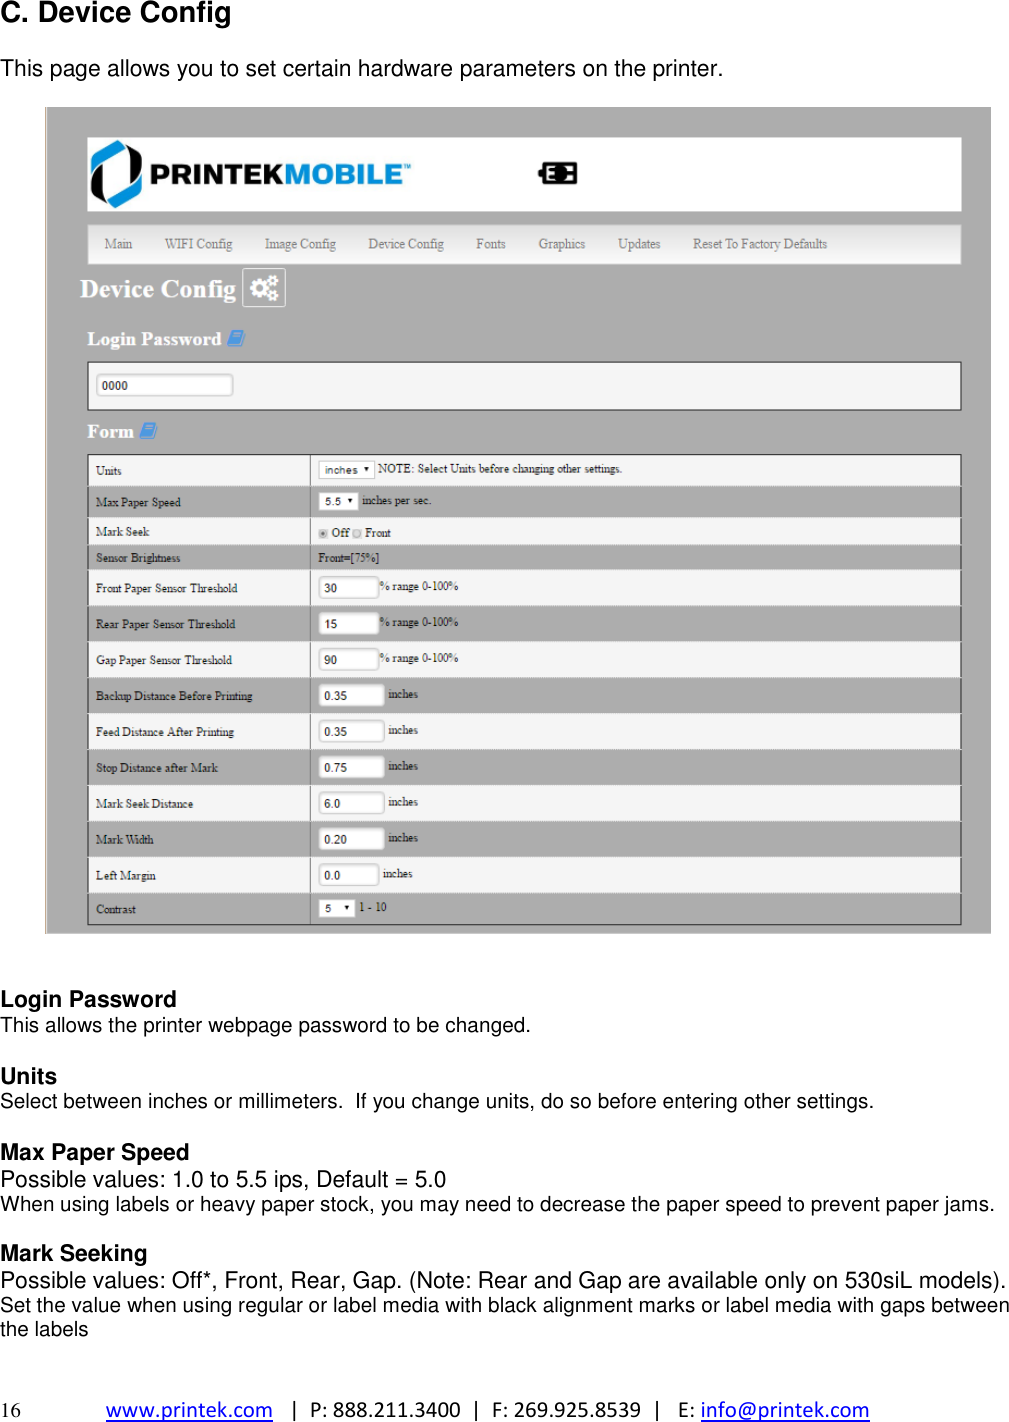  16 www.printek.com   |  P: 888.211.3400  |  F: 269.925.8539  |   E: info@printek.com  C. Device Config  This page allows you to set certain hardware parameters on the printer.     Login Password This allows the printer webpage password to be changed.  Units Select between inches or millimeters.  If you change units, do so before entering other settings.  Max Paper Speed Possible values: 1.0 to 5.5 ips, Default = 5.0 When using labels or heavy paper stock, you may need to decrease the paper speed to prevent paper jams.  Mark Seeking Possible values: Off*, Front, Rear, Gap. (Note: Rear and Gap are available only on 530siL models). Set the value when using regular or label media with black alignment marks or label media with gaps between the labels     